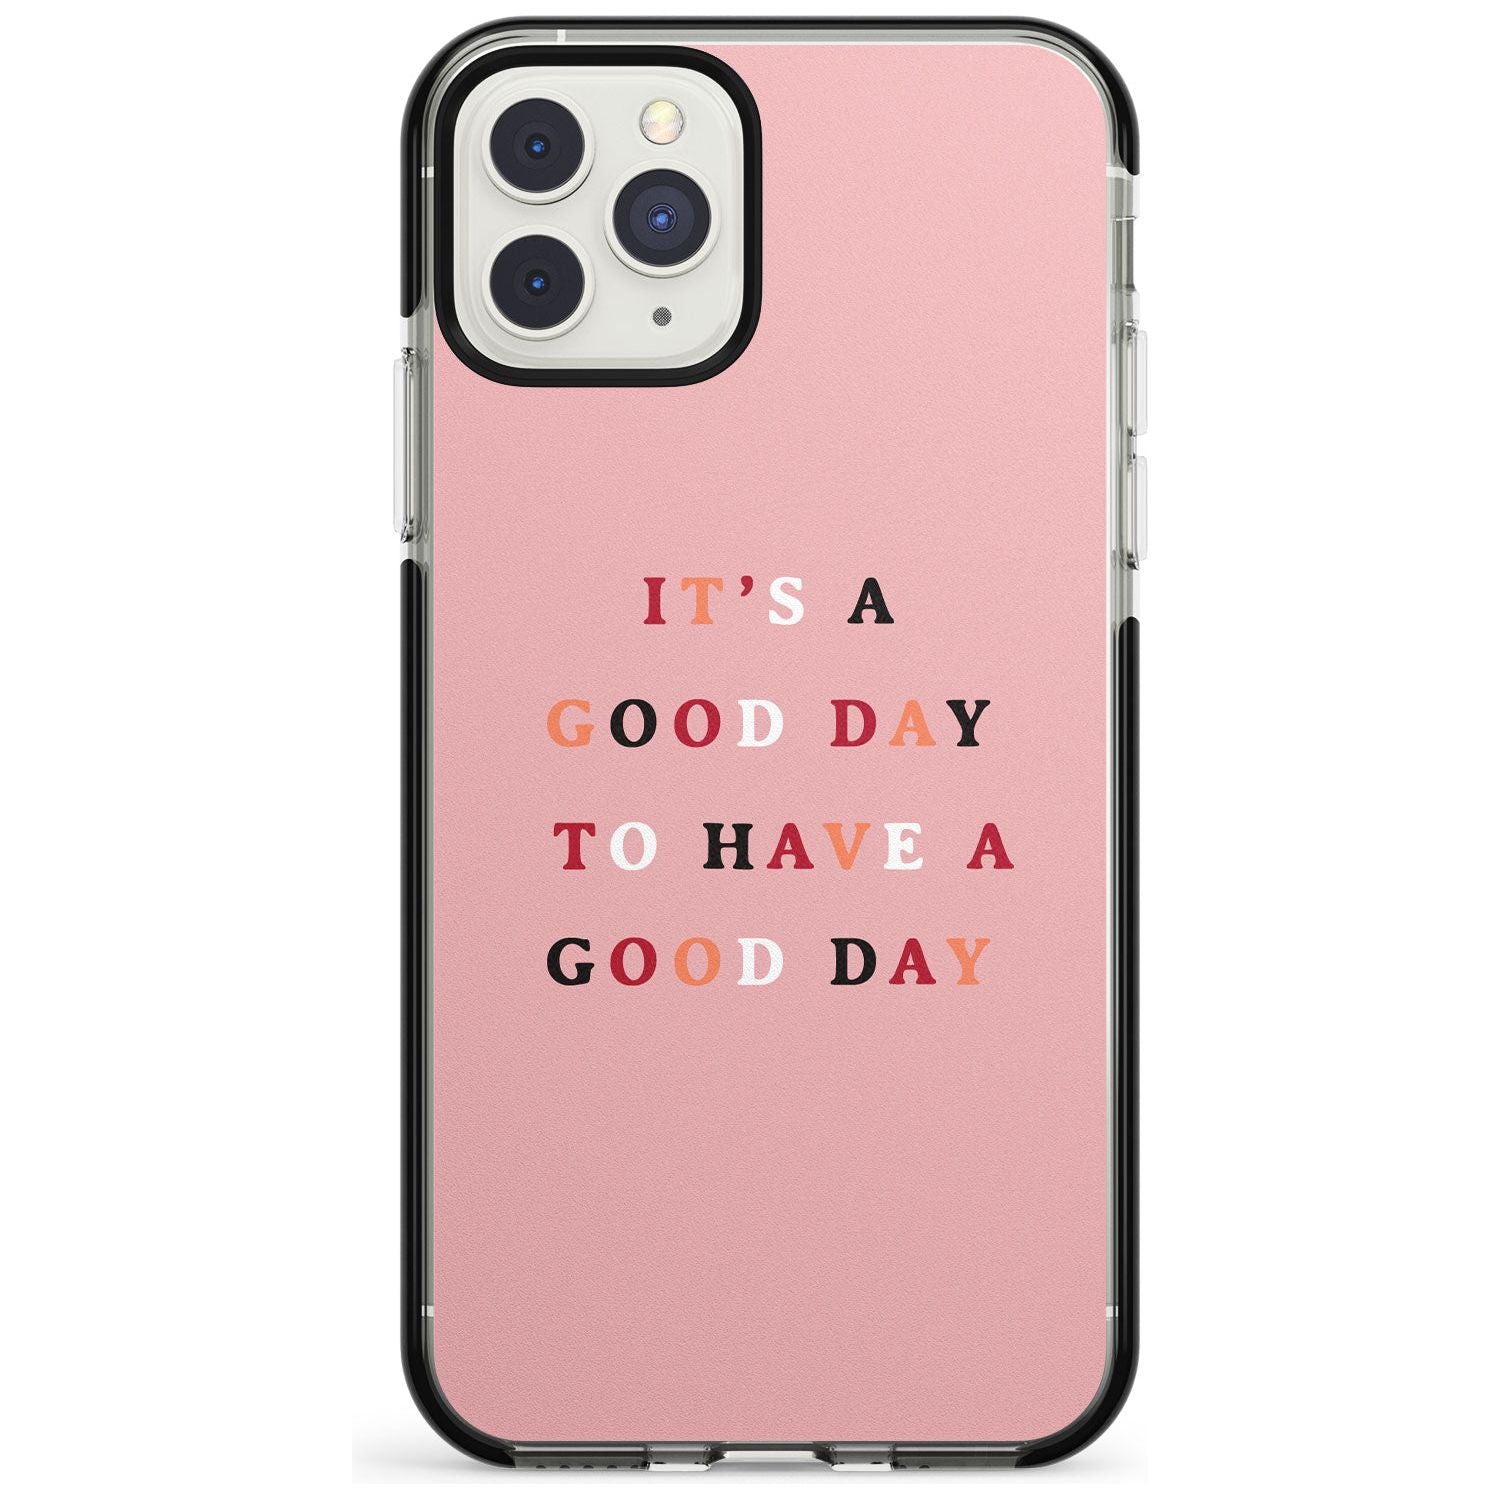 It's a good day to have a good day Black Impact Phone Case for iPhone 11 Pro Max